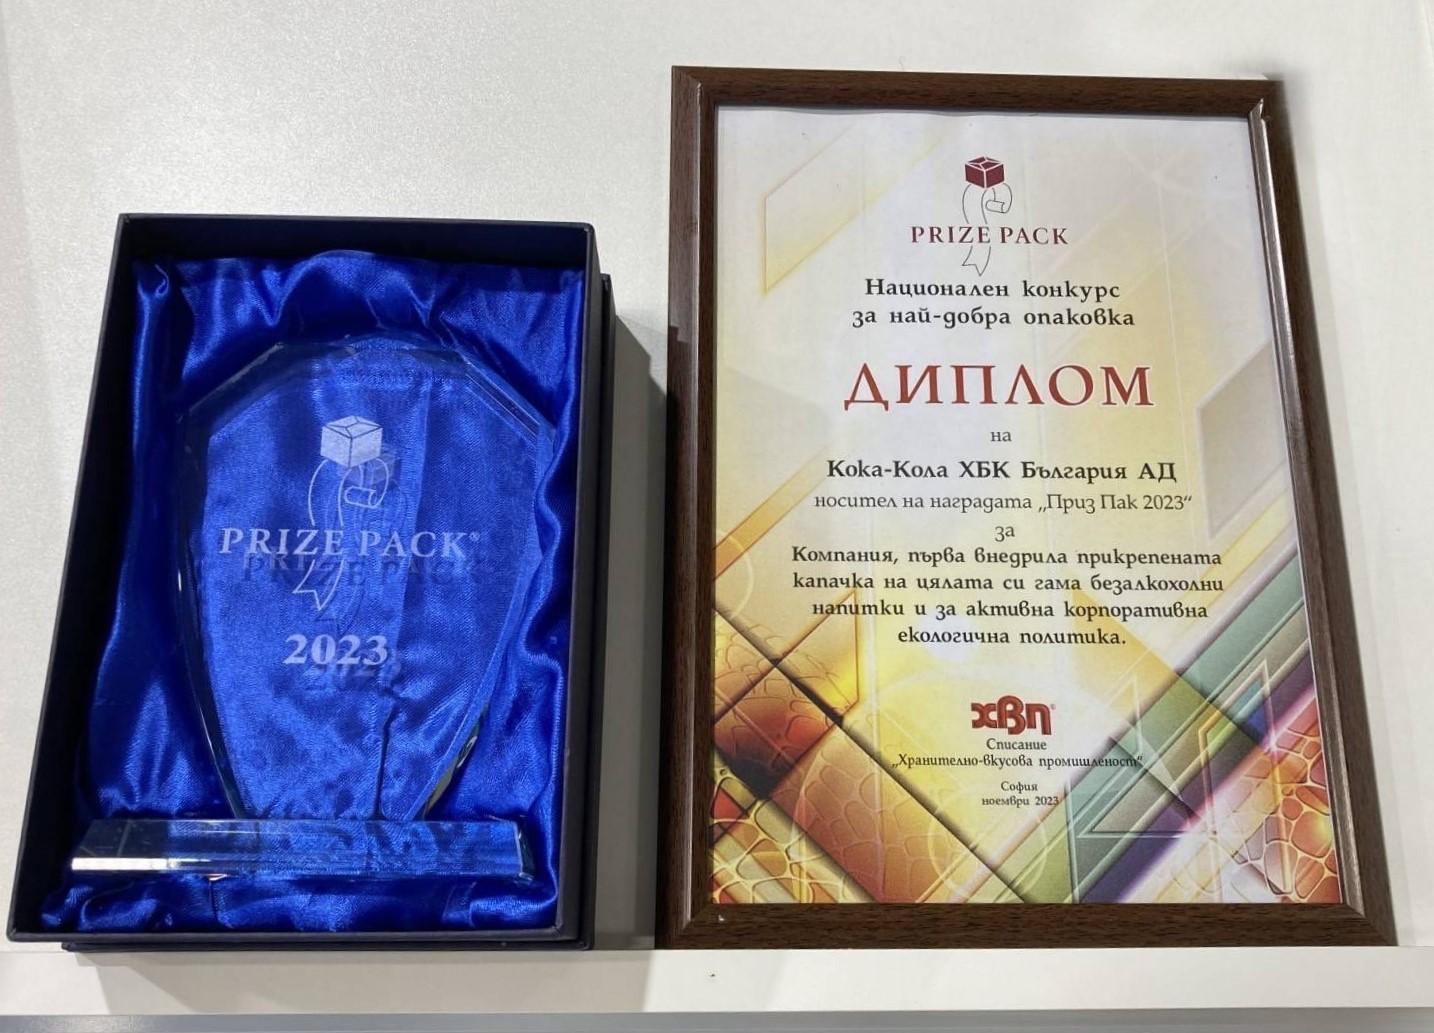 Coca-Cola HBC Bulgaria with an award from the National Competition for Best Packaging “Prize Pack 2023”